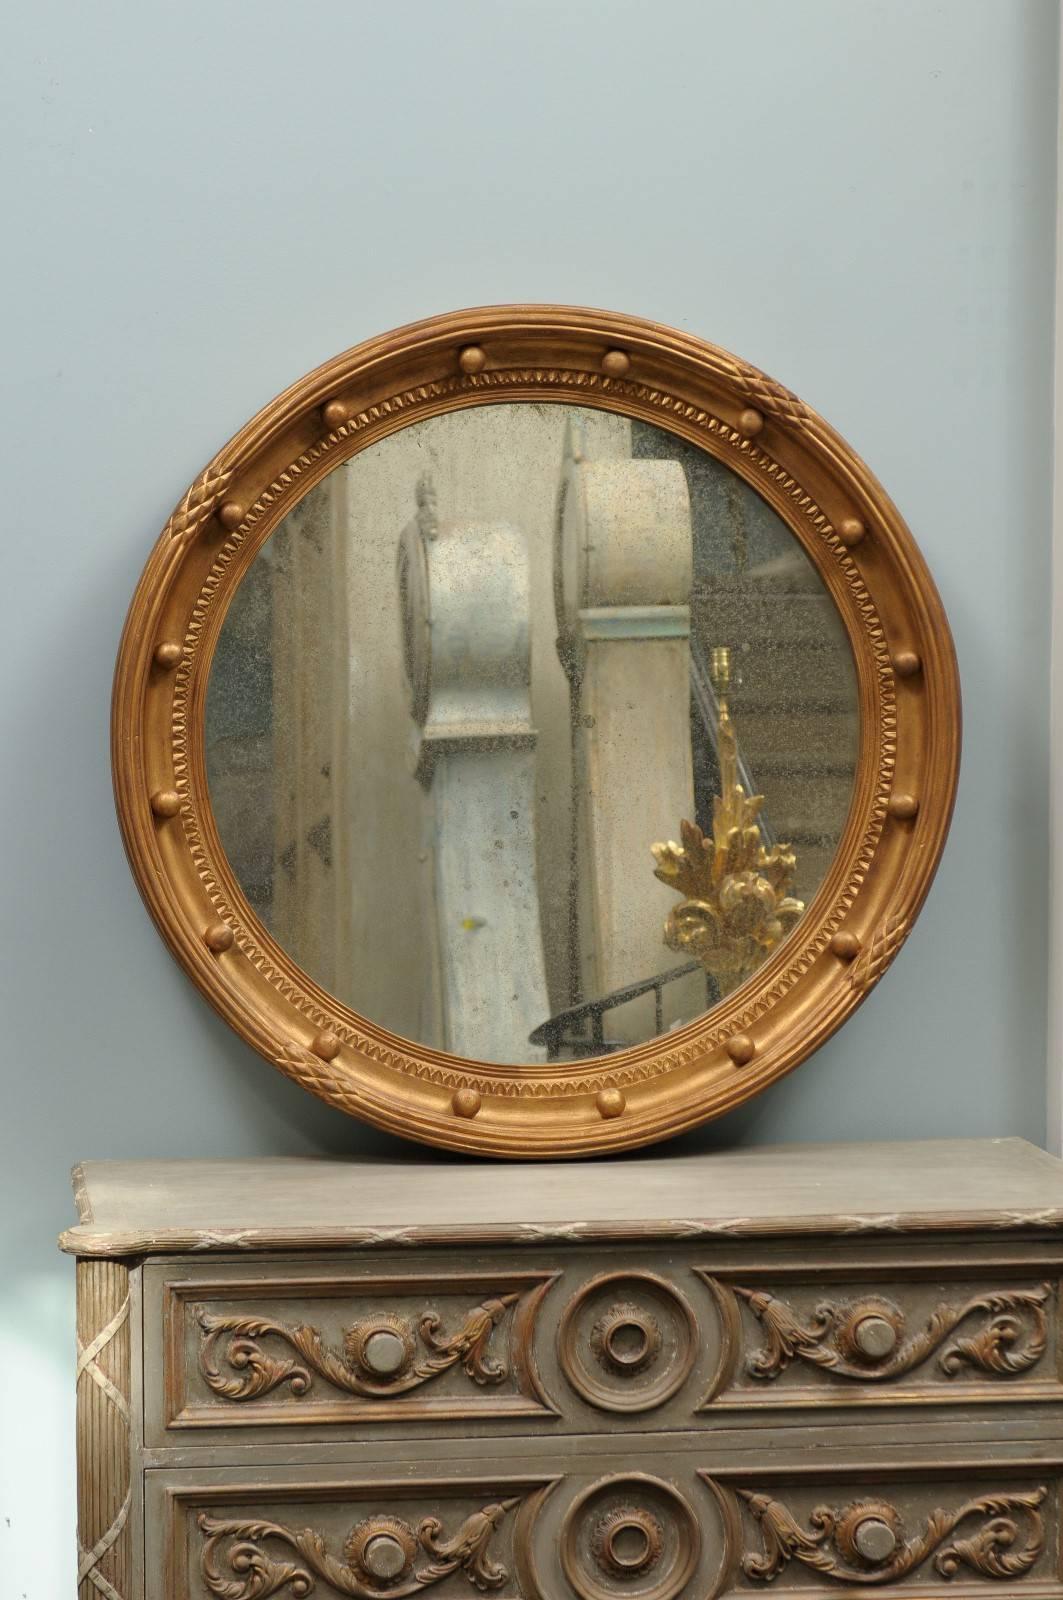 A gilded wood girandole bullseye round mirror. This girandole mirror features a gilded wood circular frame with small spheres, rhythmically spread out on the surround. The inside of the frame is decorated with an egg-and-dart reminiscent motif. The